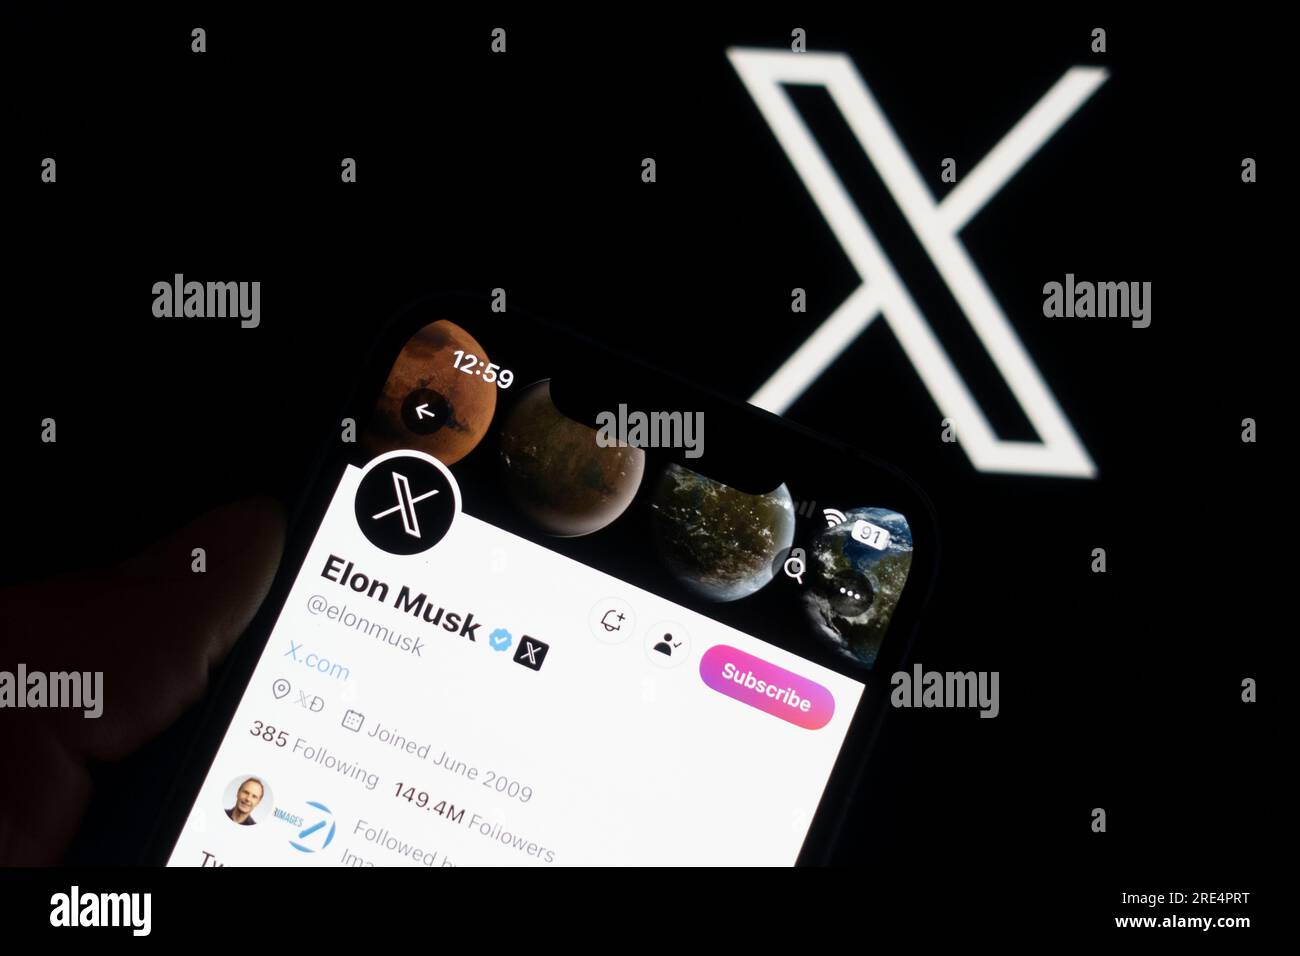 Edinburgh, Scotland, UK. 25 July 2023. A photo illustration showing Elon Musk’s X page against the logo of the new Twitter which has been rebranded X by owner Elon Musk. Iain Masterton/Alamy Live News Stock Photo